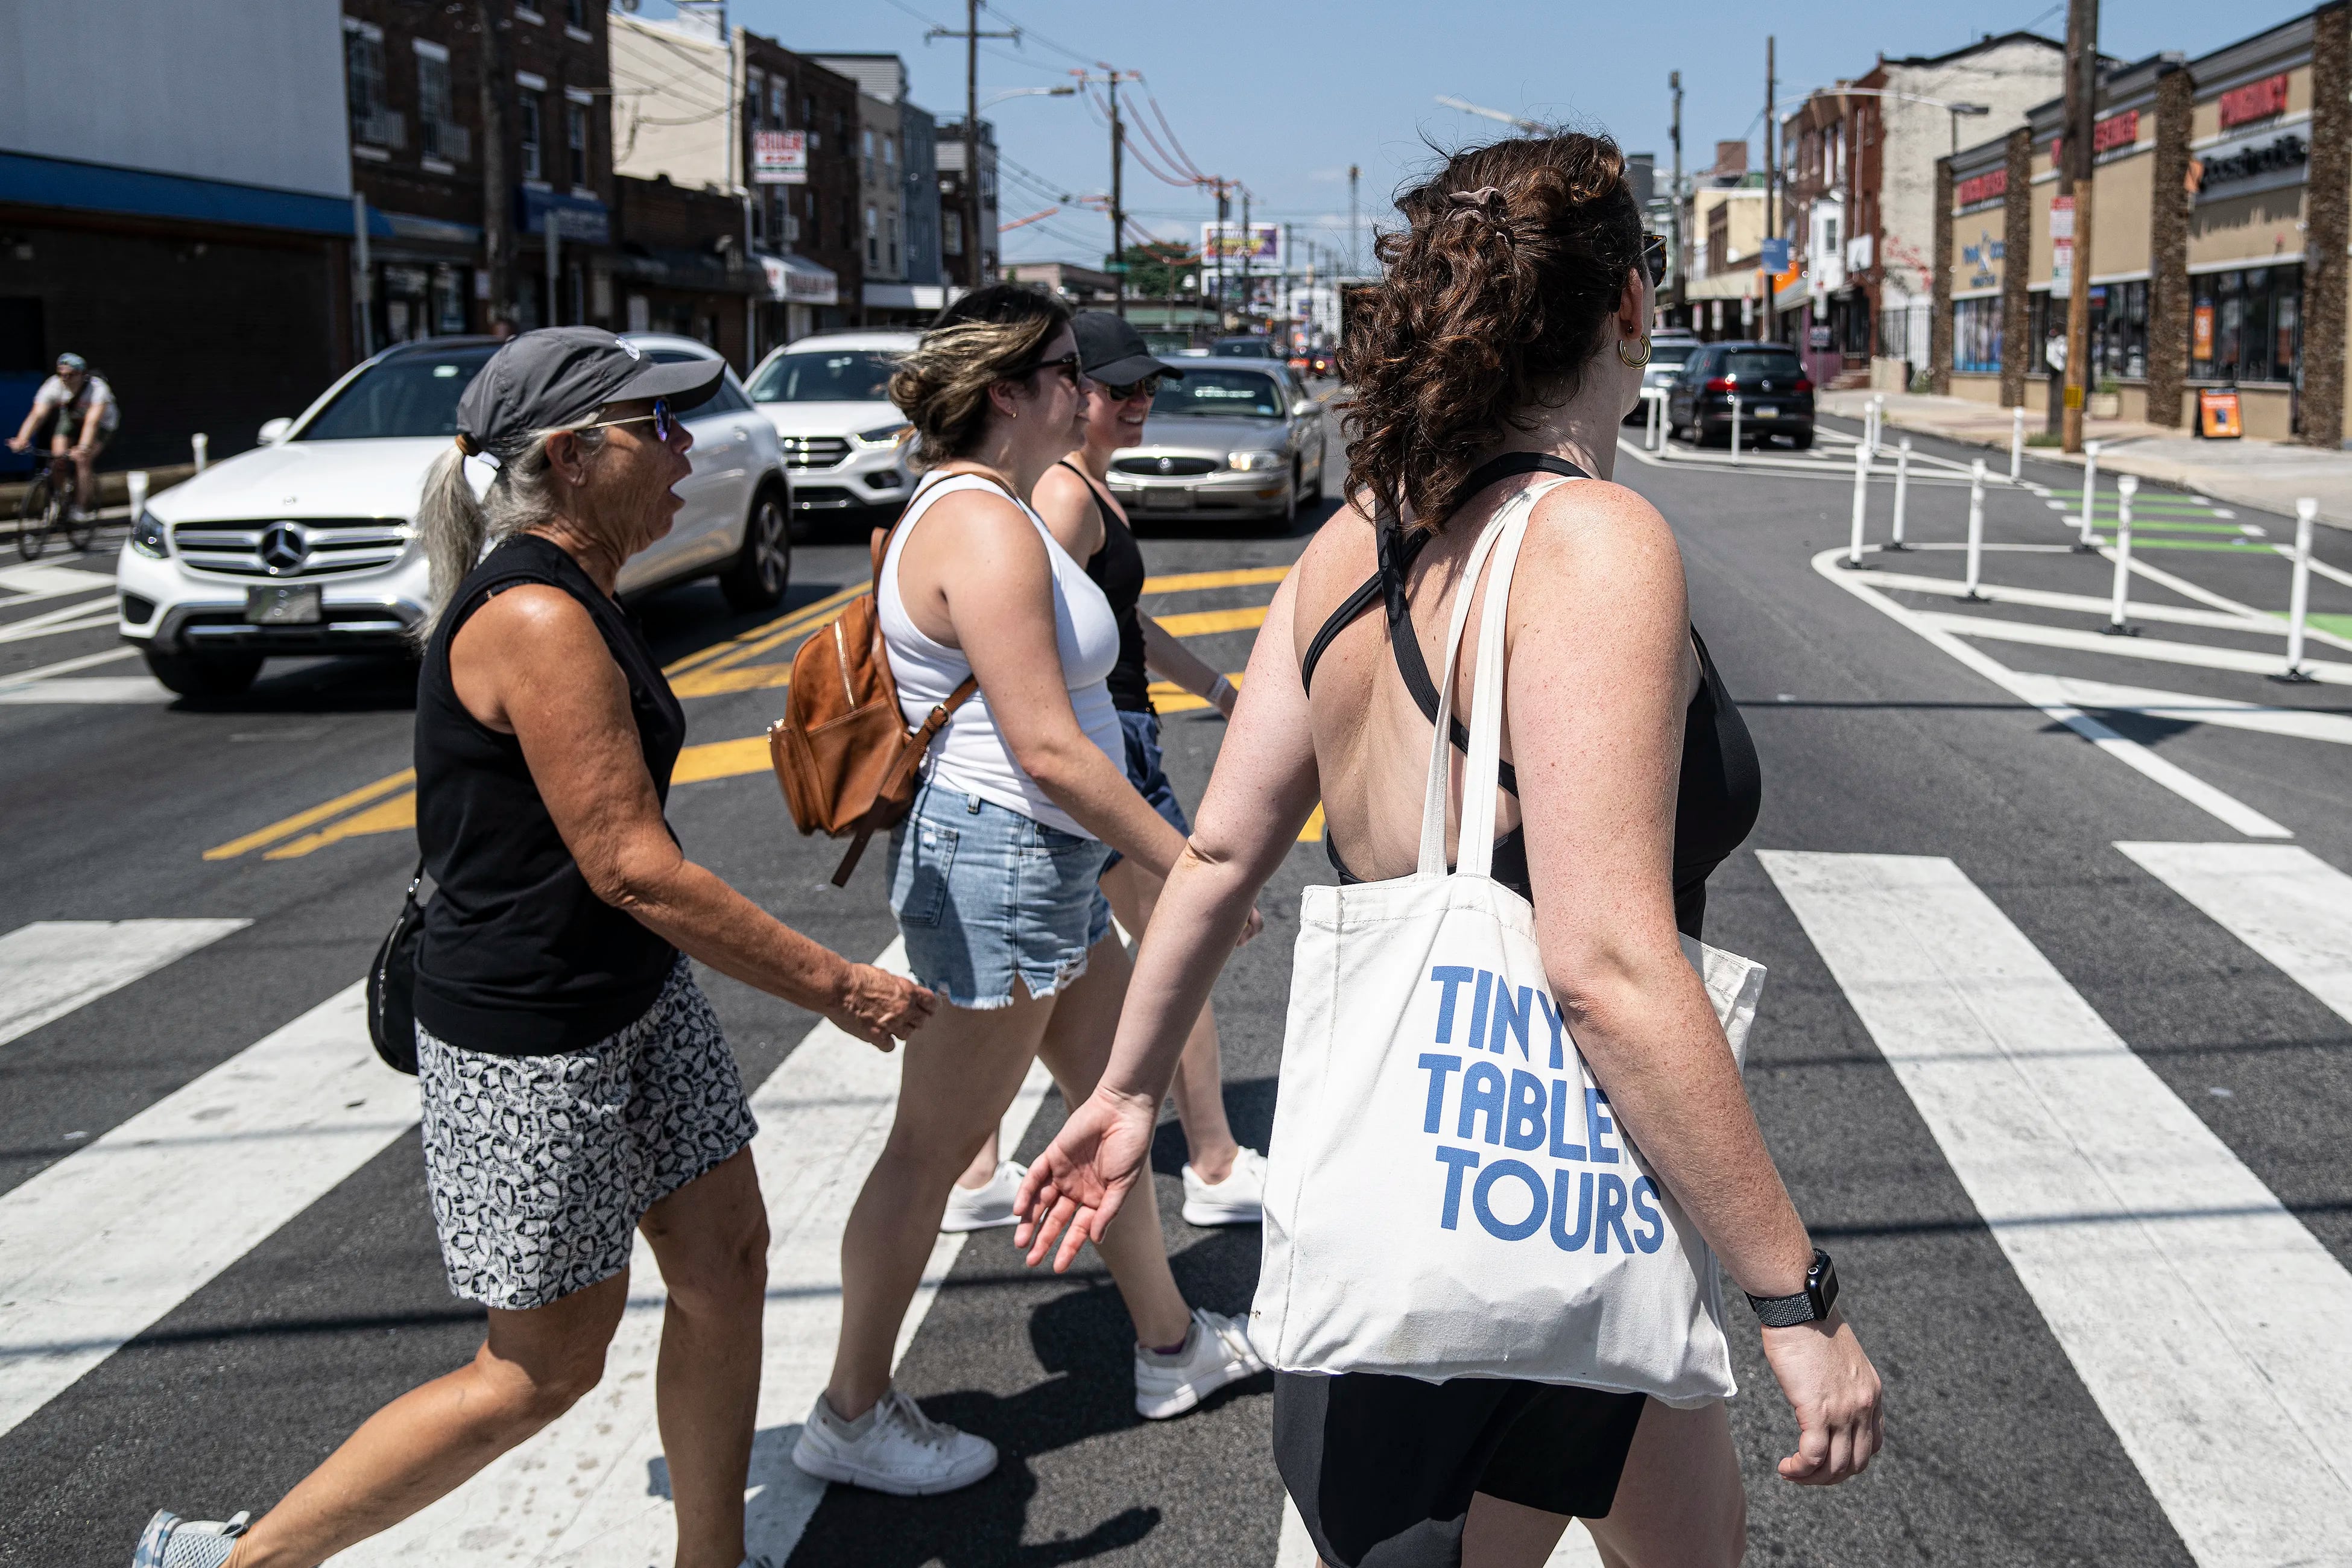 Maddy Sweitzer-Lammé (right), the founder of Tiny Table Tours, walks the streets of Philadelphia with Florida tourists Mary Pat Murphy (from left), Katie Murphy, and Maggie Murphy in South Philadelphia.